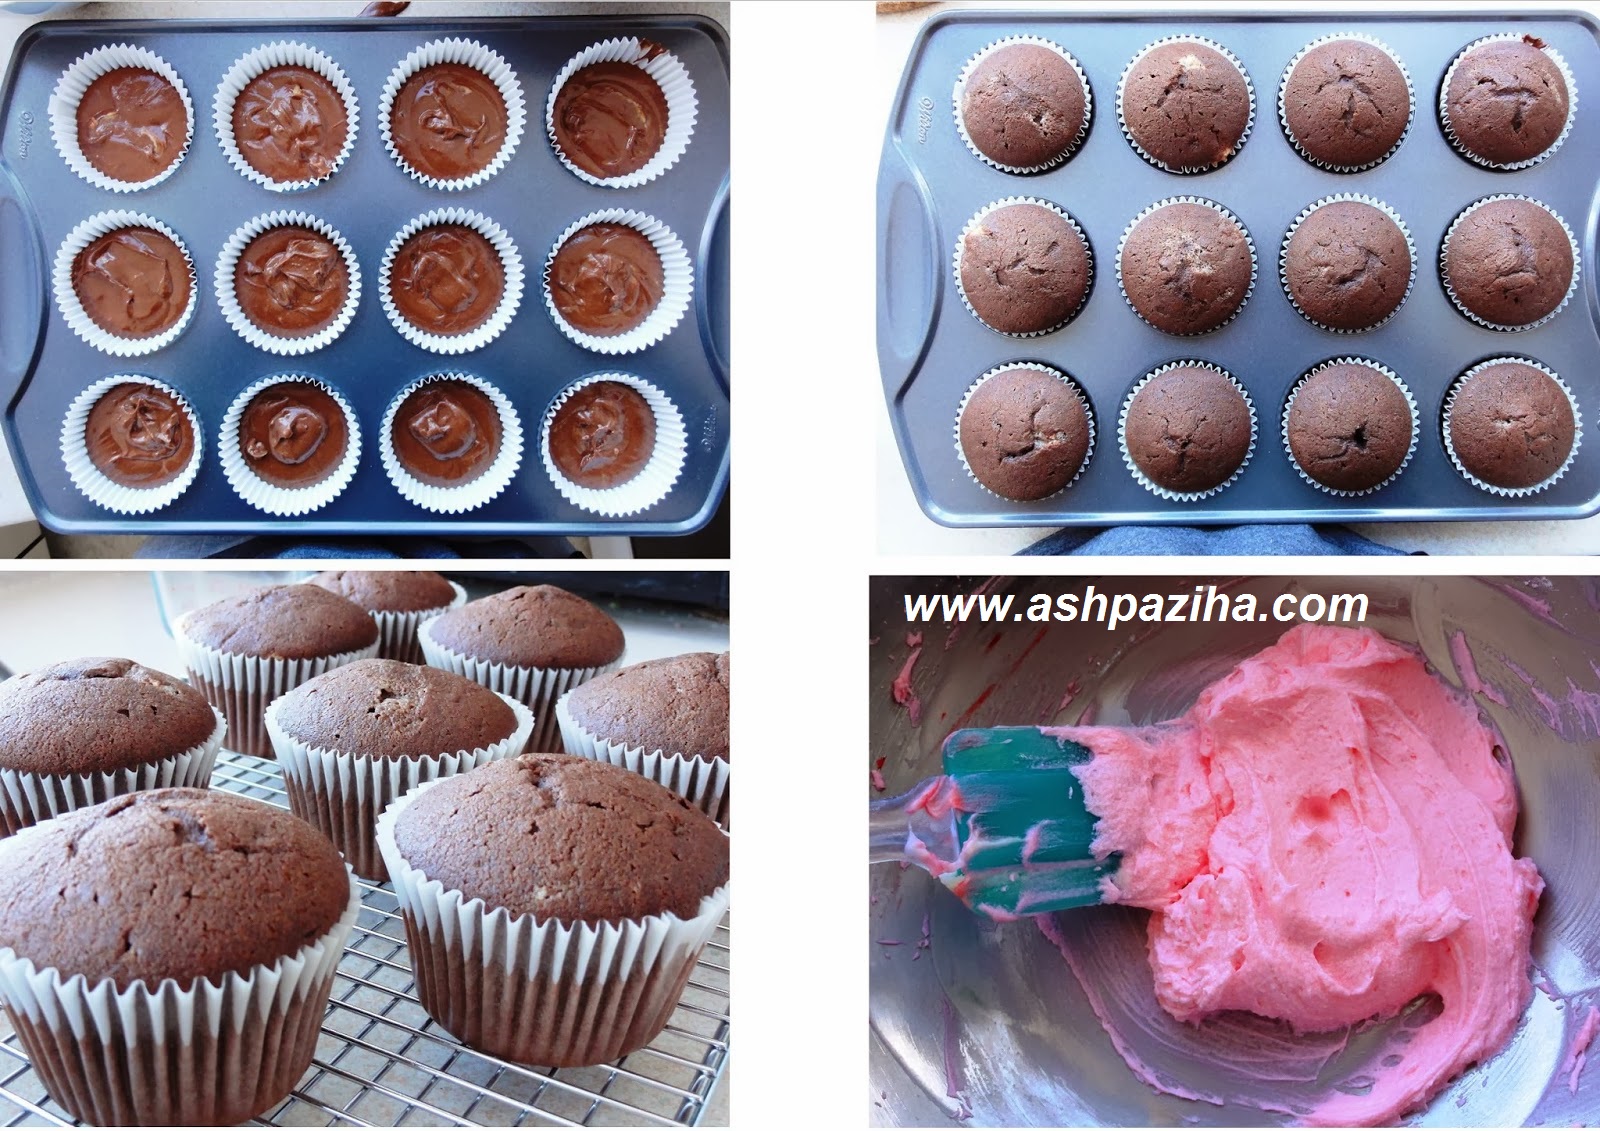 Recipe - Cup - Cakes - Chocolate - heart - shaped - the training - image (2)